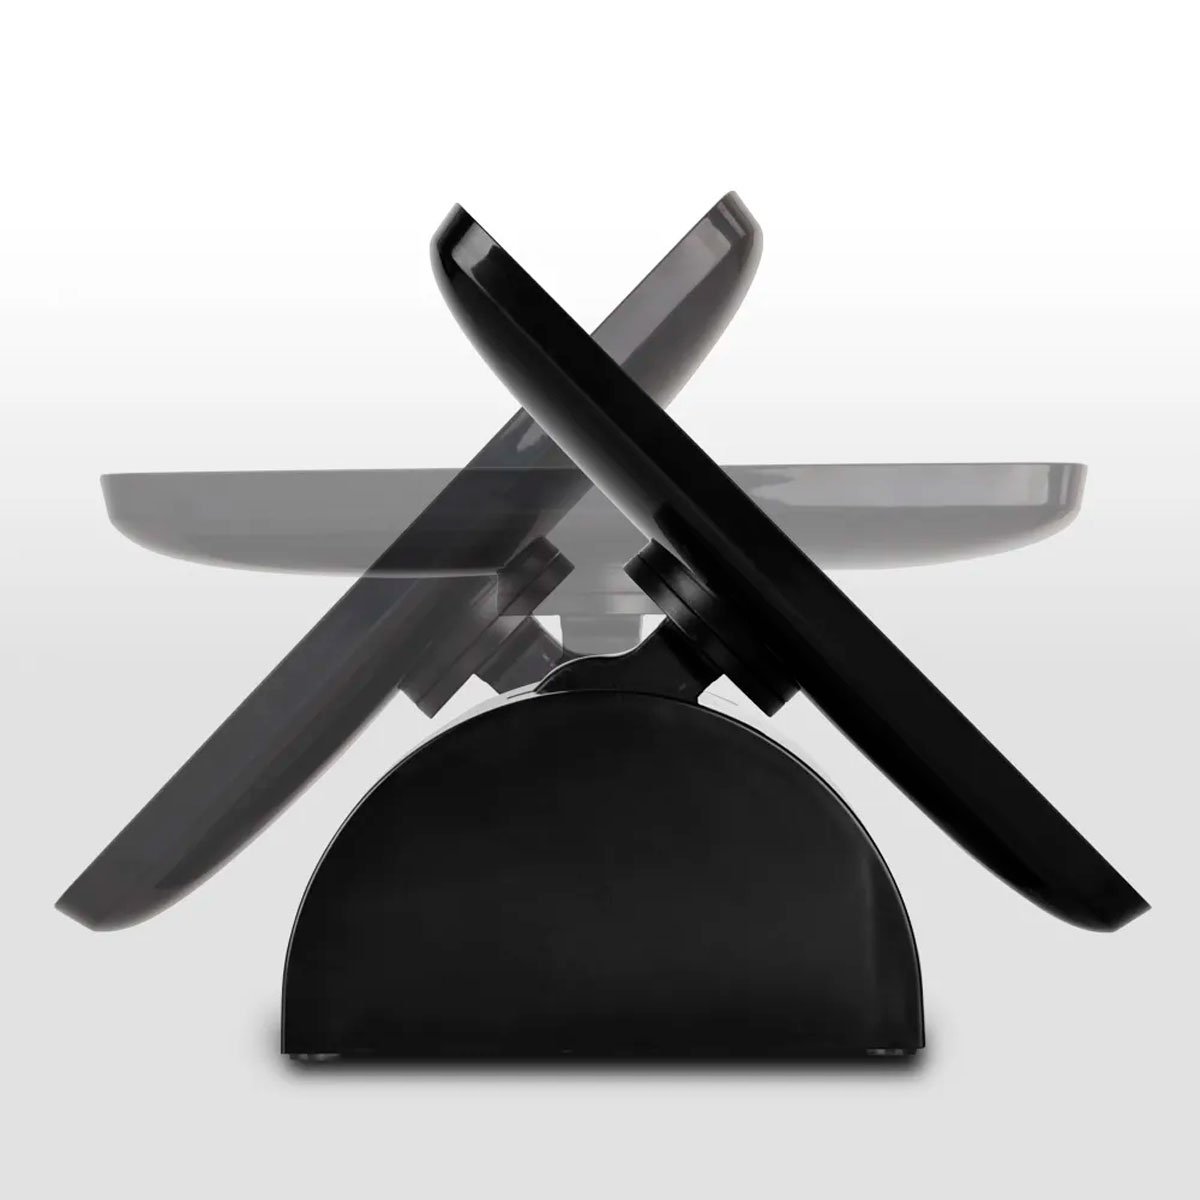 Flip Secure Table Stand For iPads Rotation 360˚